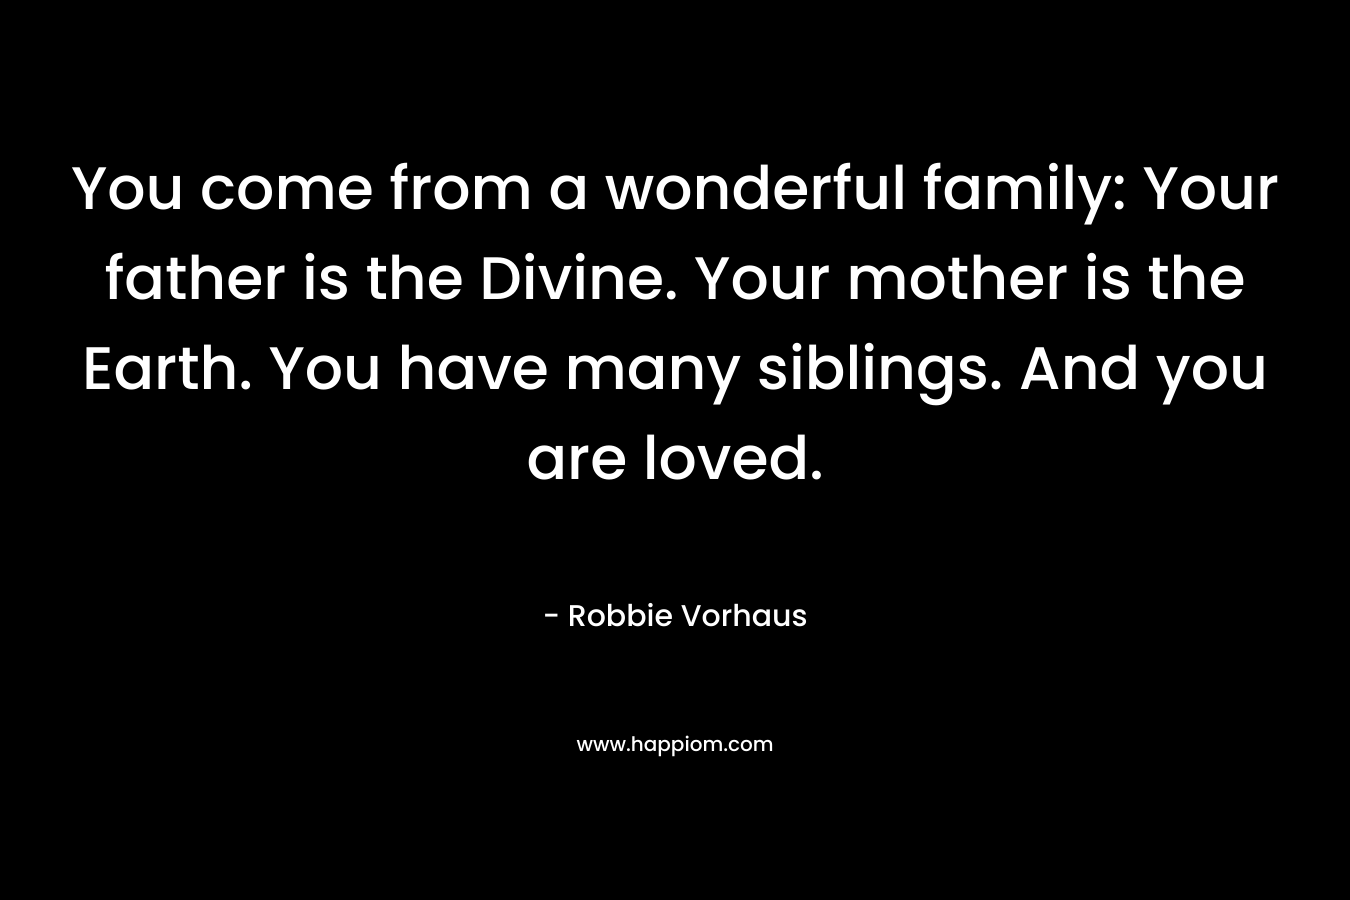 You come from a wonderful family: Your father is the Divine. Your mother is the Earth. You have many siblings. And you are loved. – Robbie Vorhaus